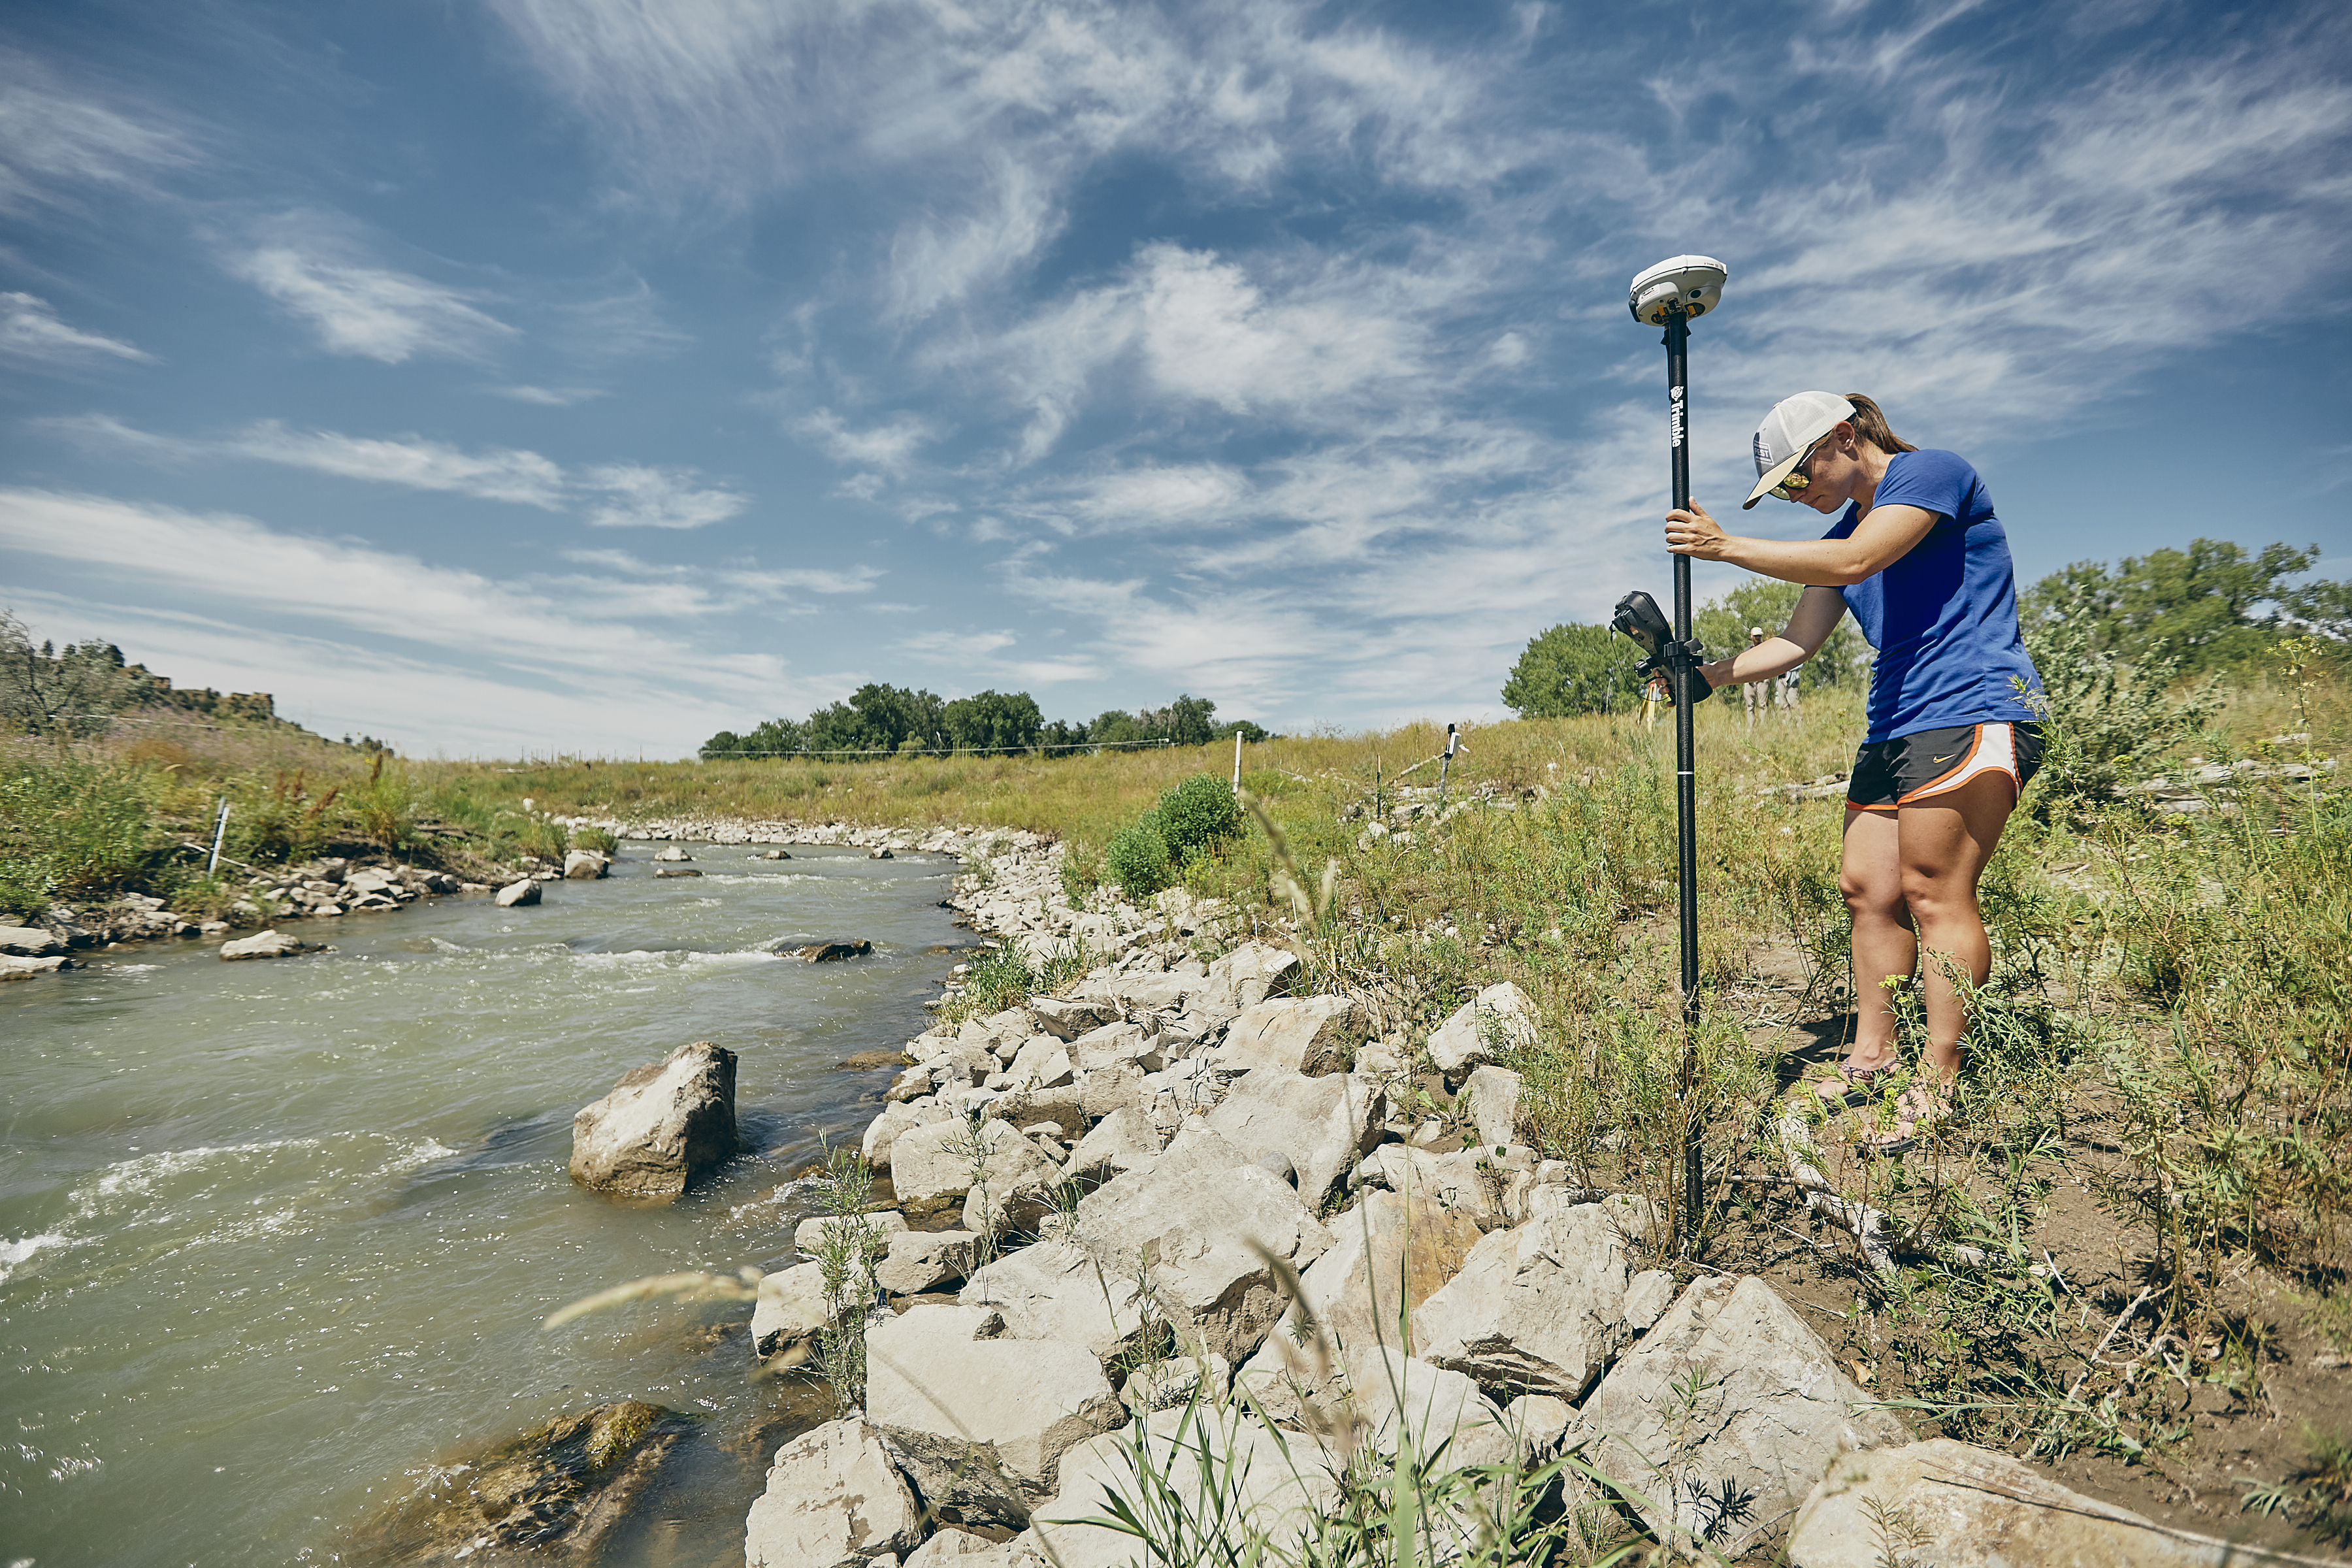 Haley uses GPS surveying equipment to collect topographic data for her hydraulic model.